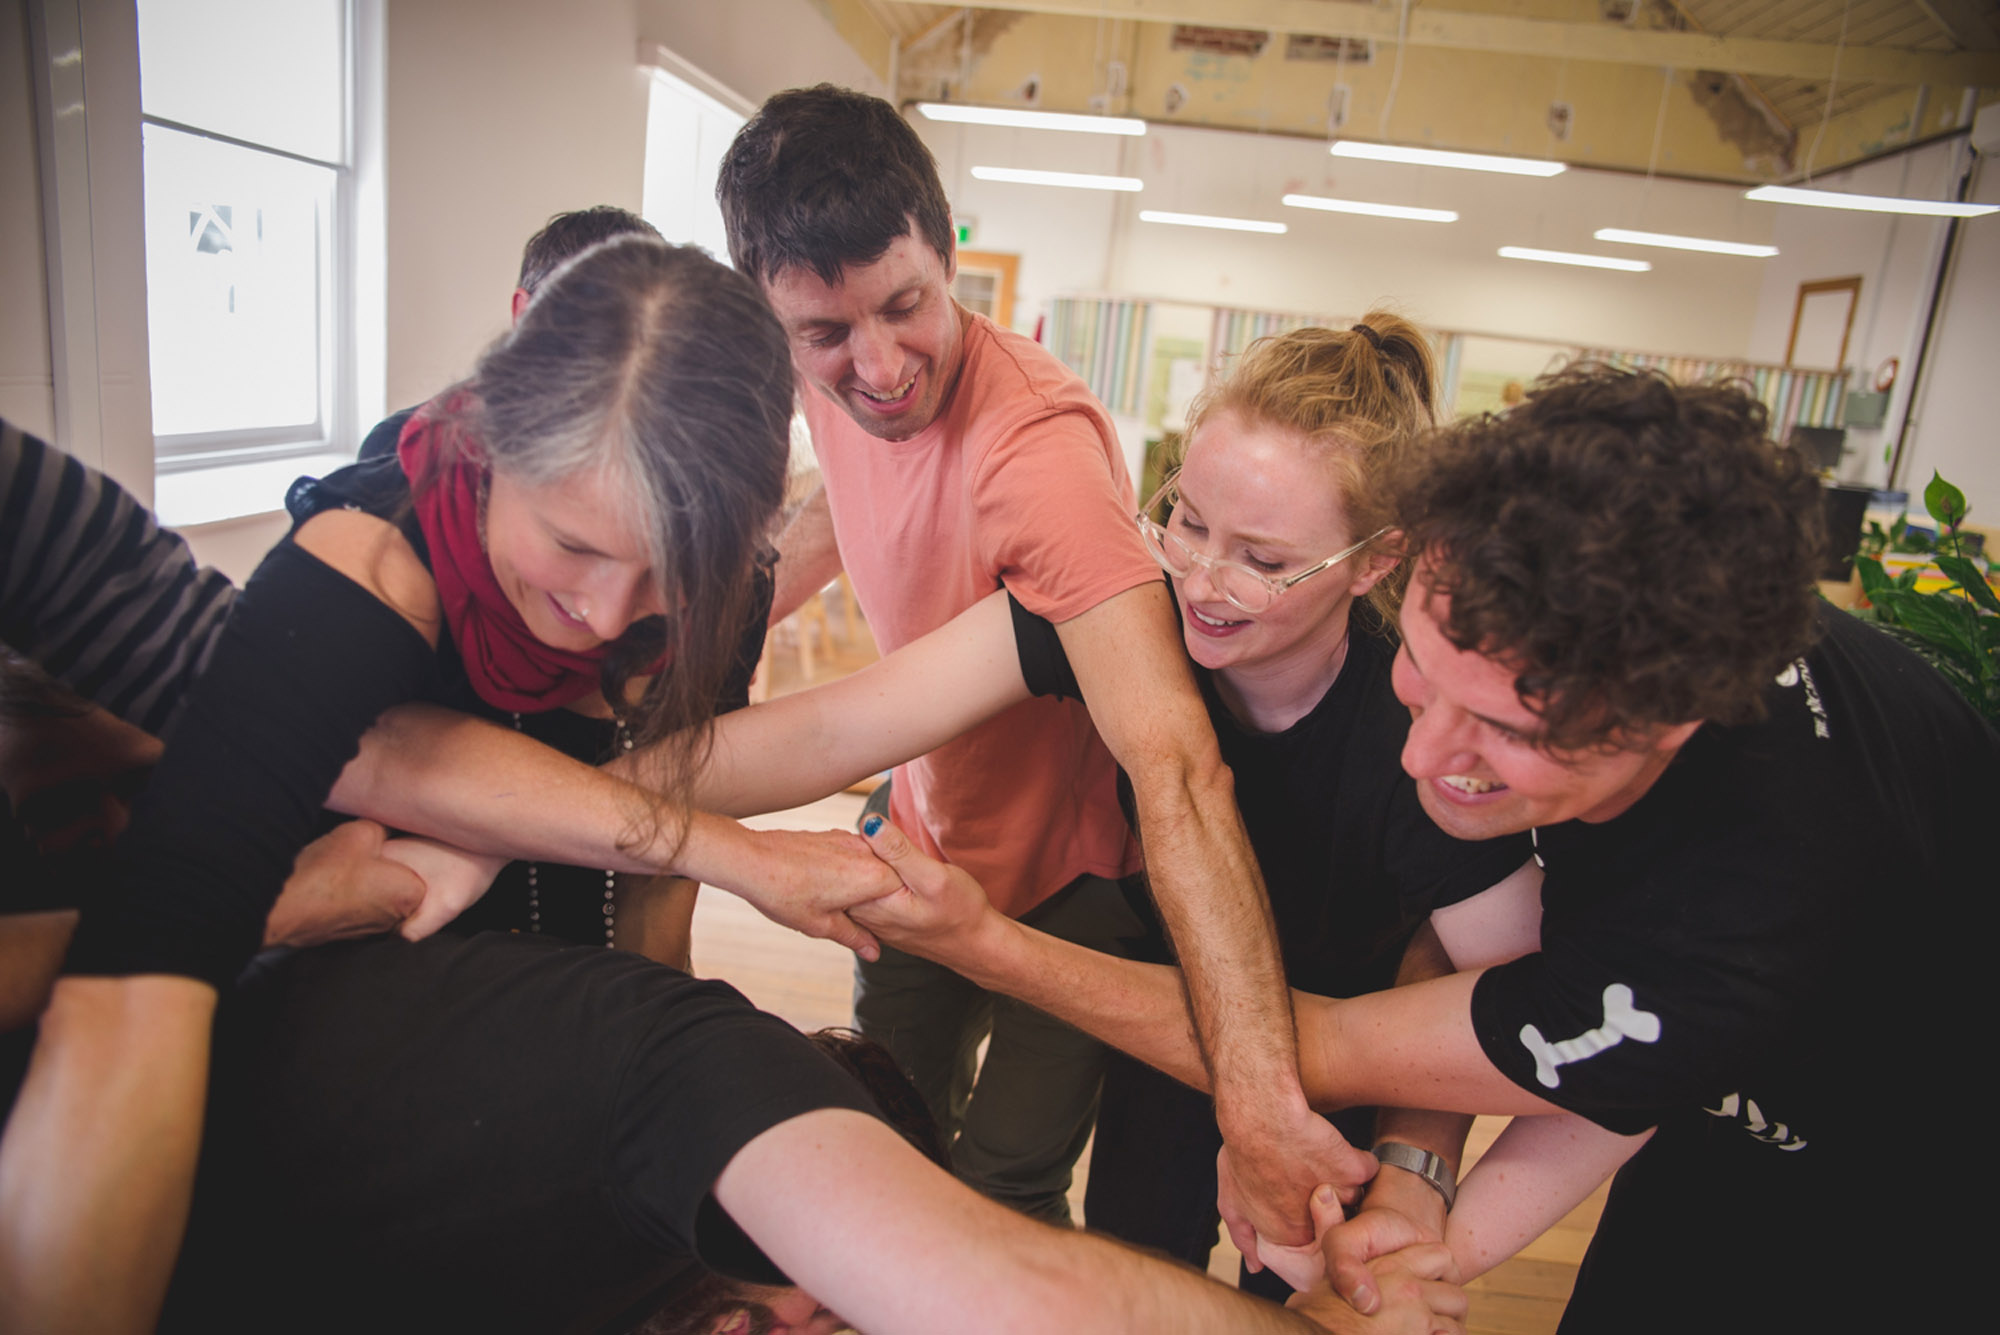 A professional development workshop photo. A group of artists have tangled their arms together, and are trying to untangle themselves without letting go of each other's hands.